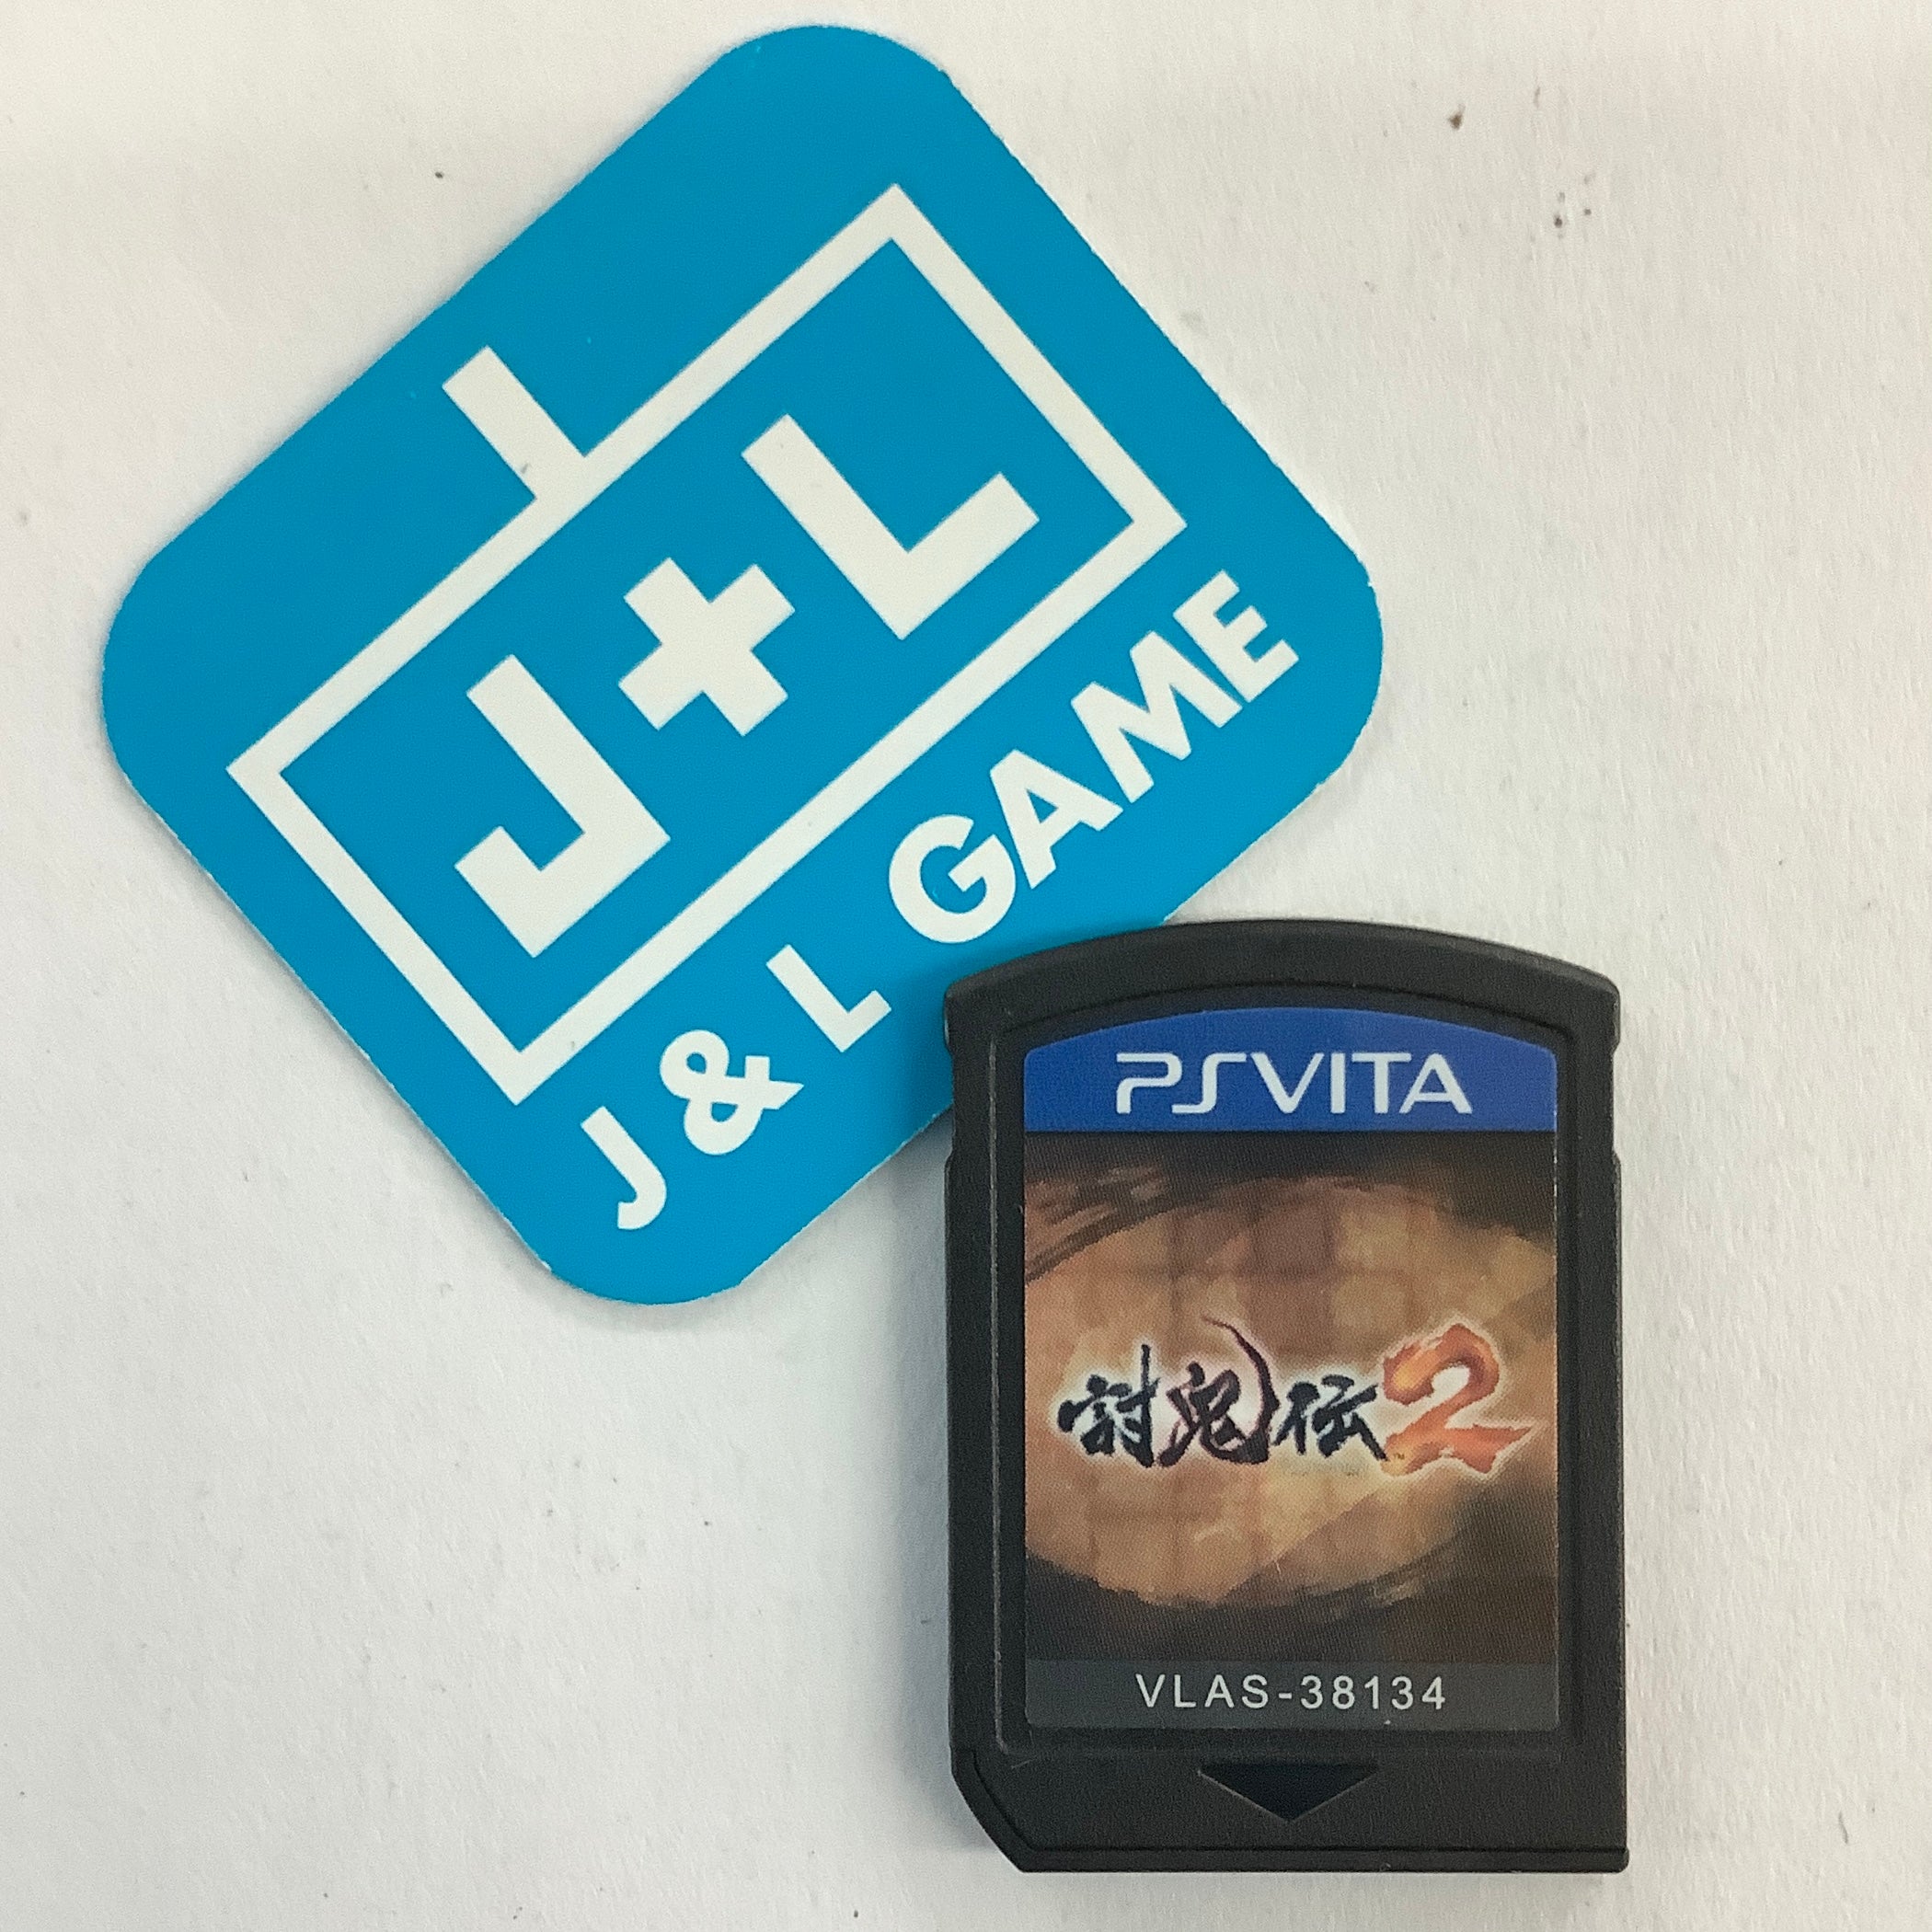 Toukiden 2 (Chinese Sub) - (PSV) PlayStation Vita [Pre-Owned] (Asia Import) Video Games J&L Video Games New York City   